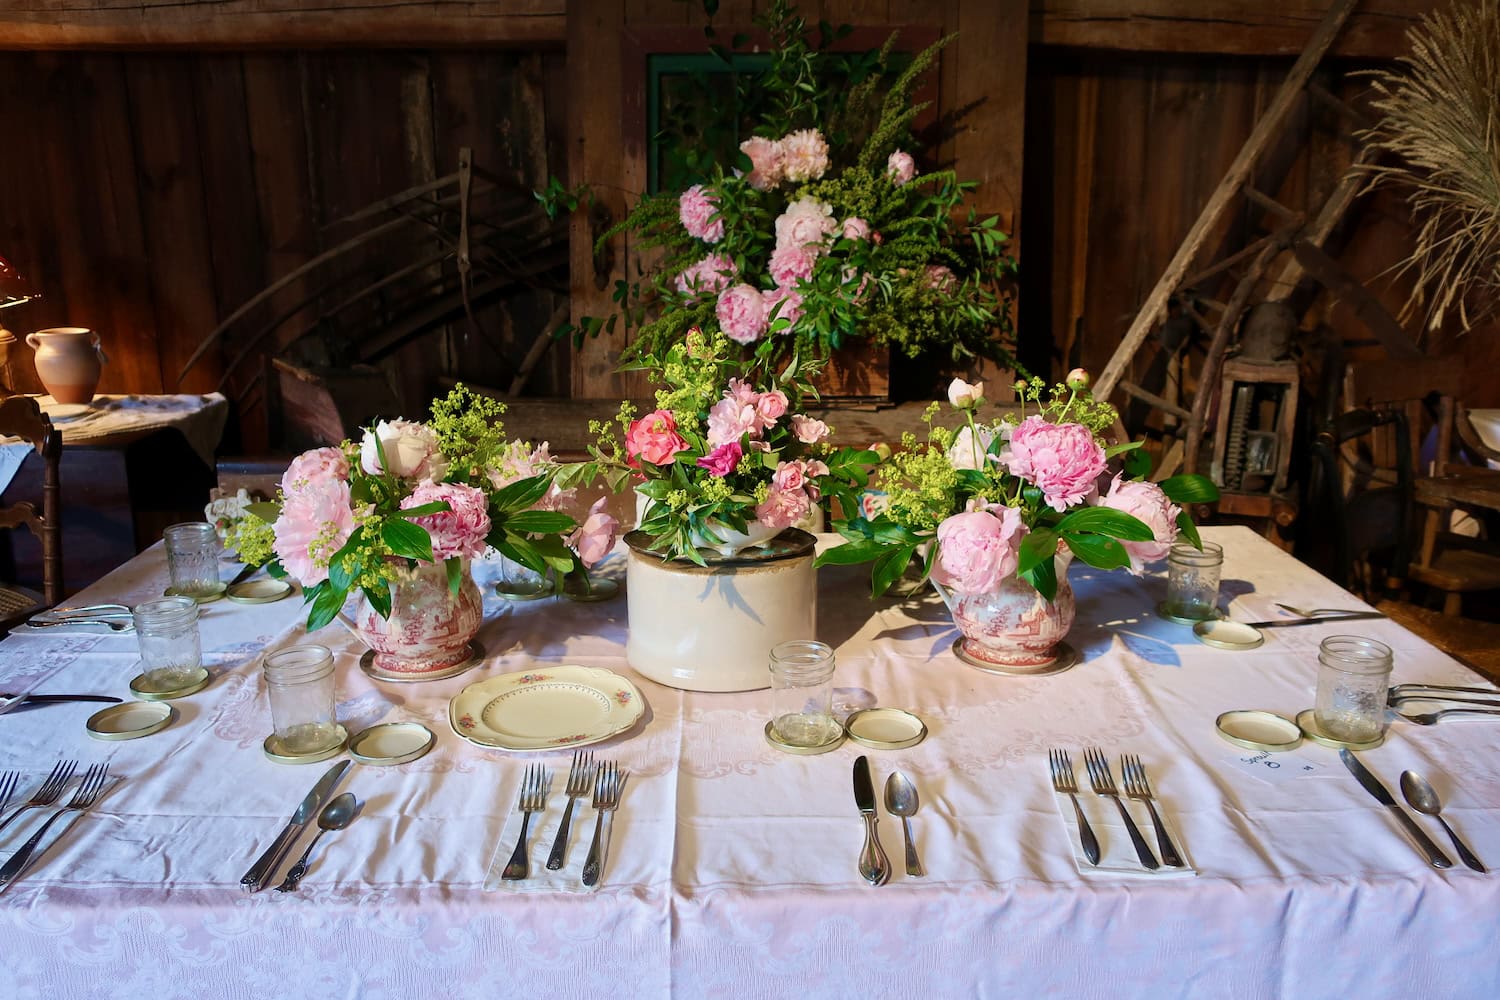 Hurd Orchards Holley NY themed farm Luncheon - roses and peonies